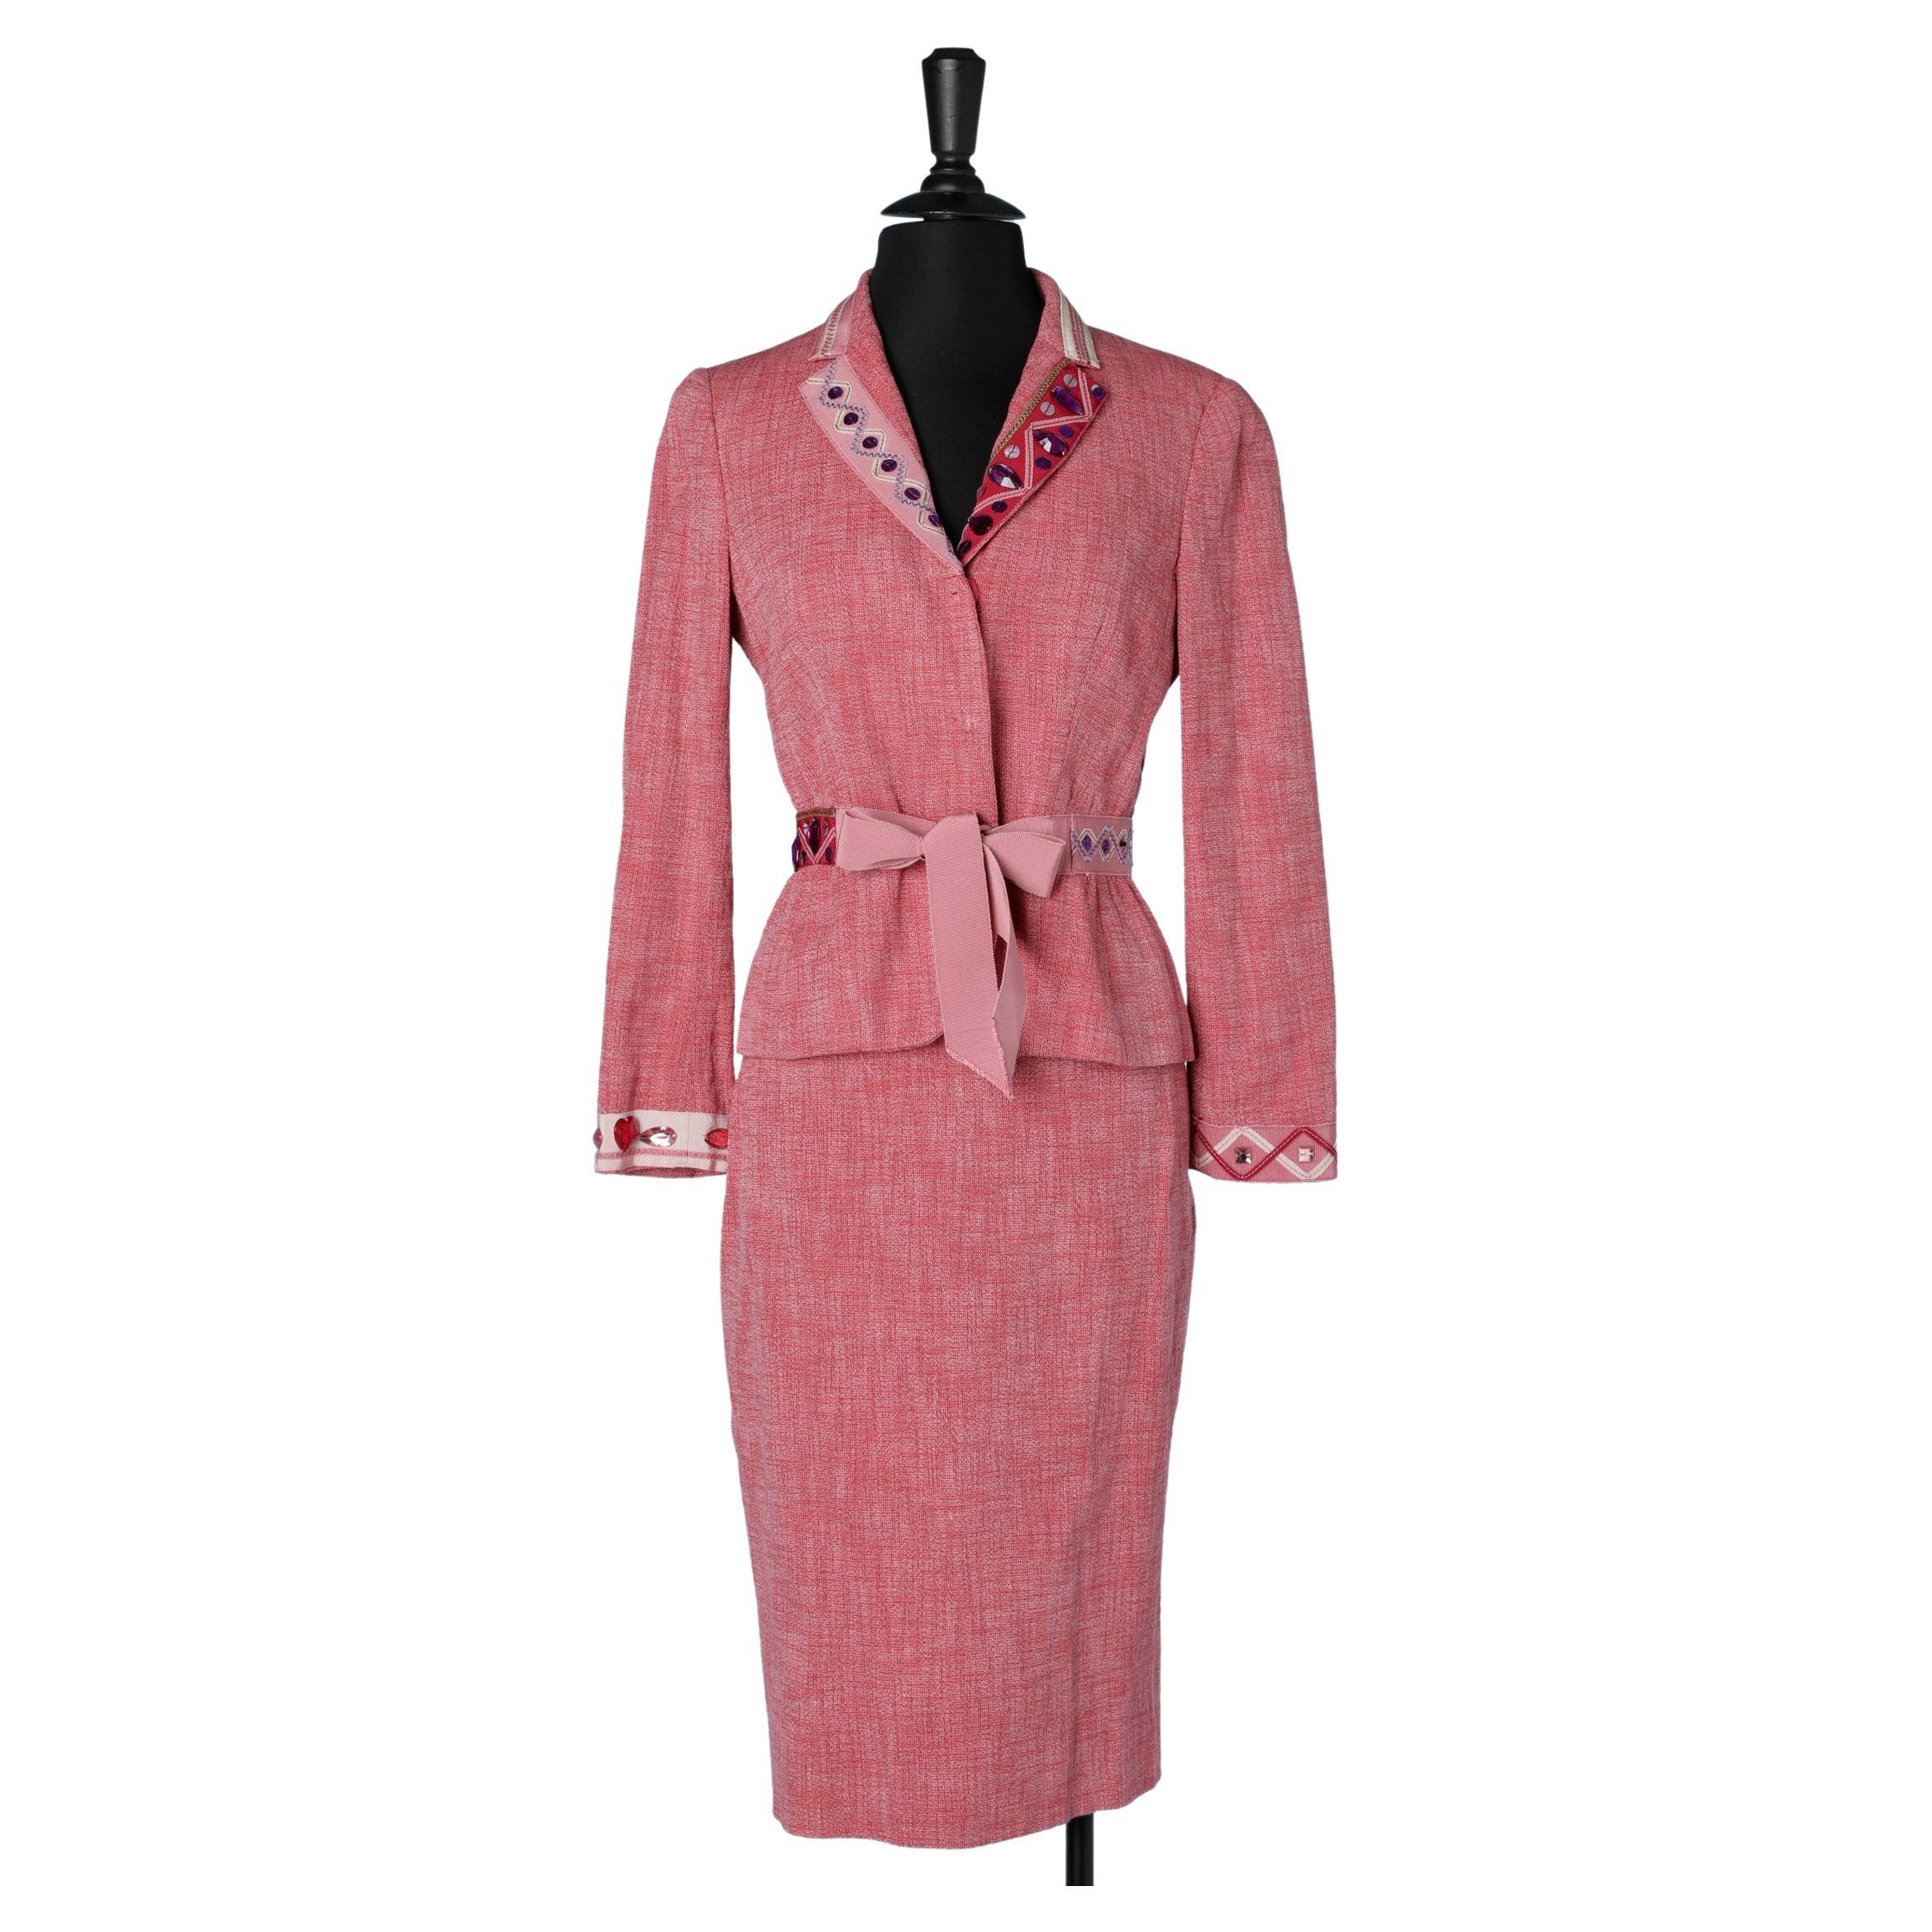 Pink skirt-suit with cabochons and ribbons embellishment Moschino Cheap and Chic For Sale